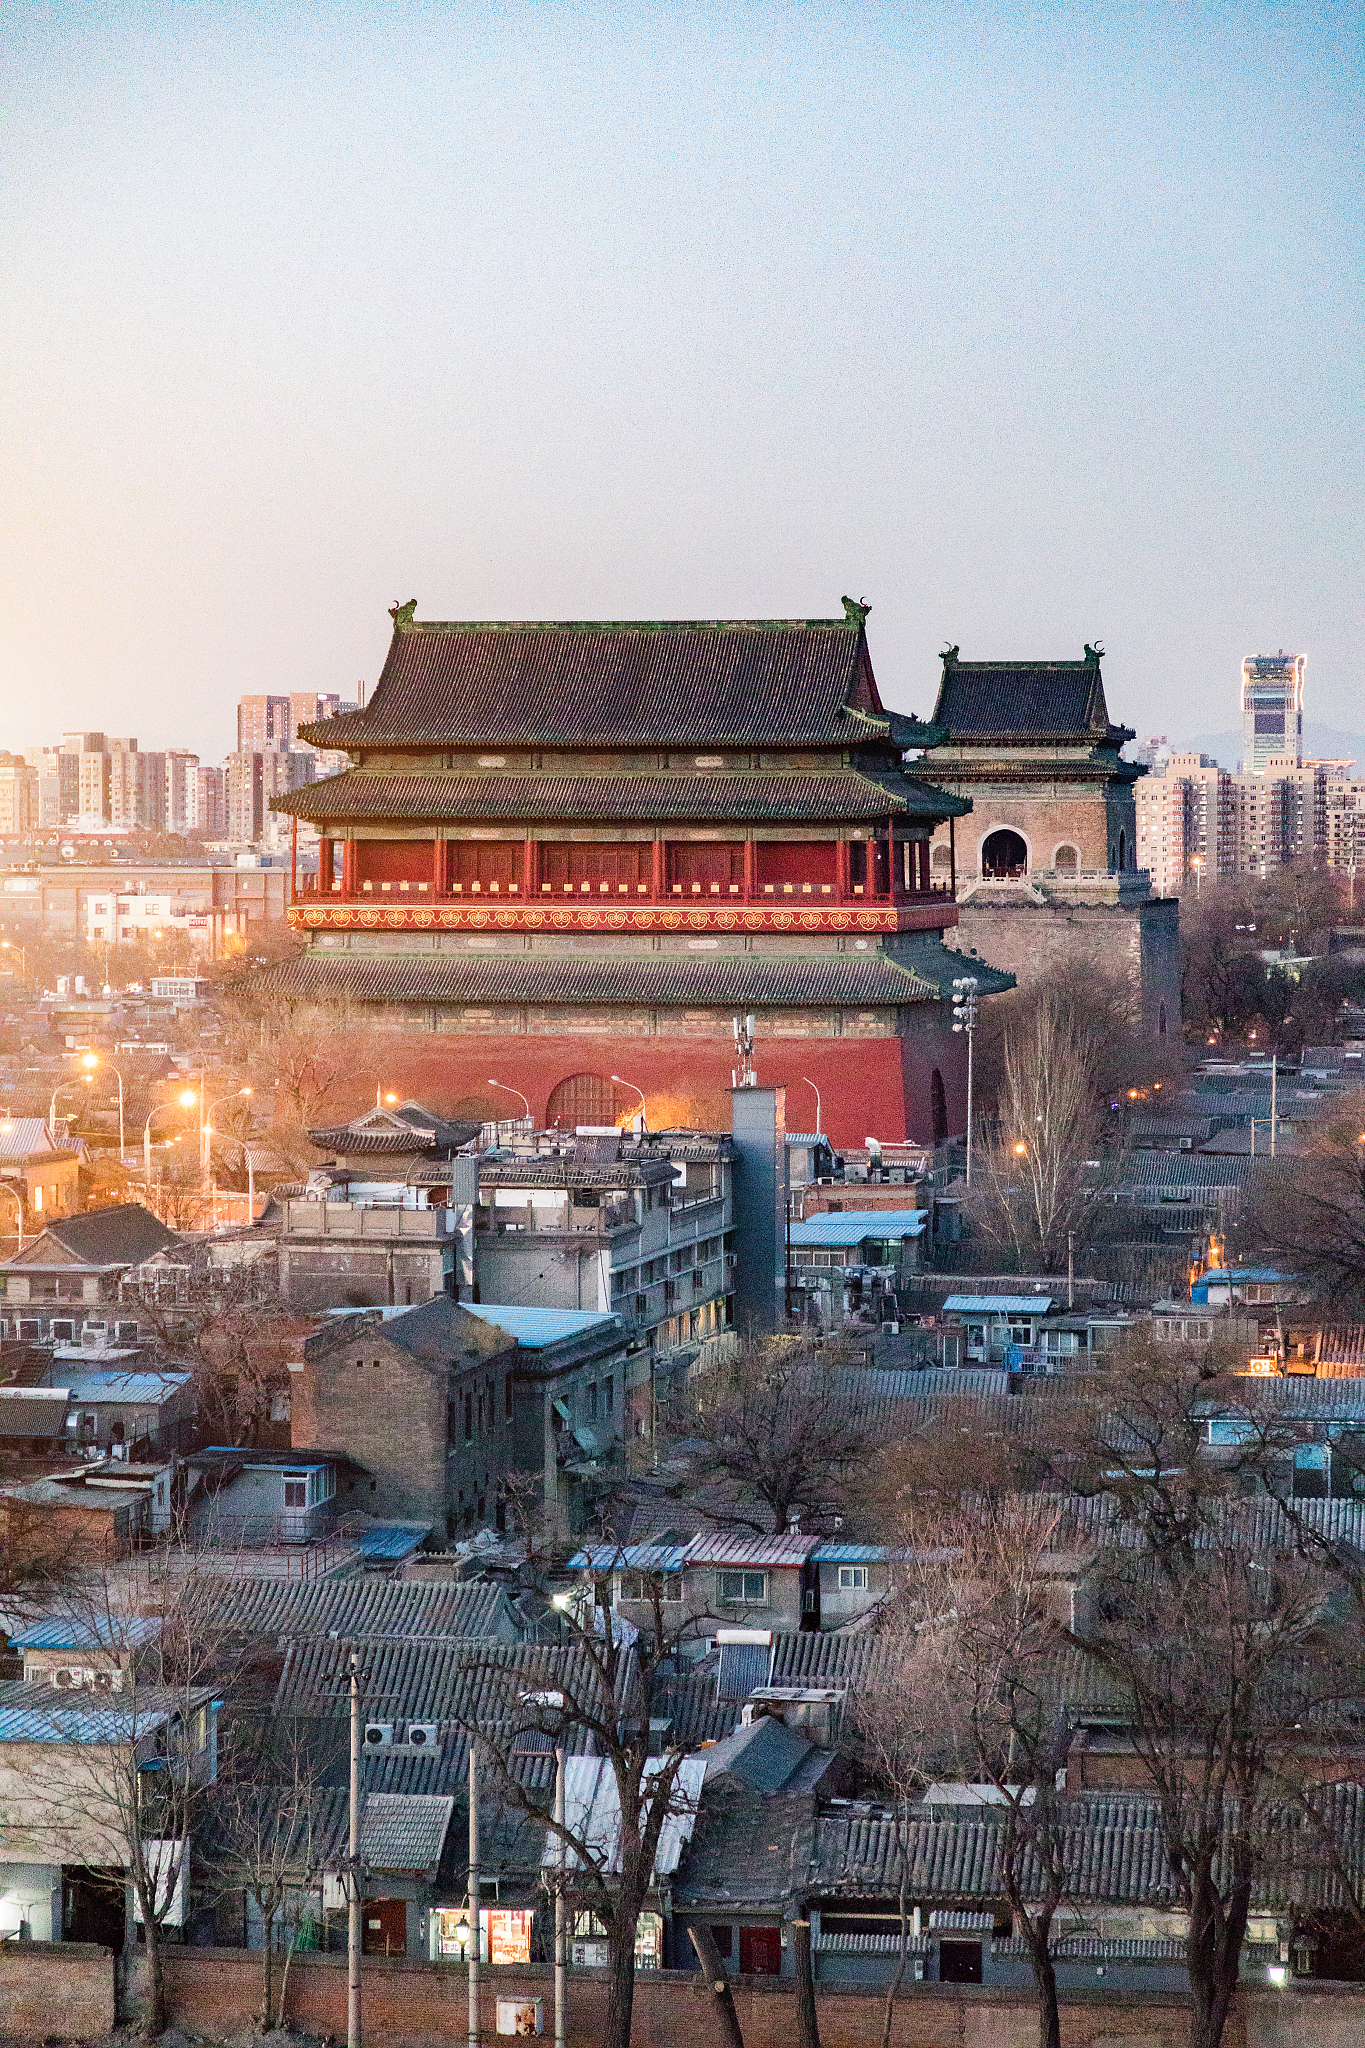 The Drum Tower and Bell Tower in Beijing. /CFP